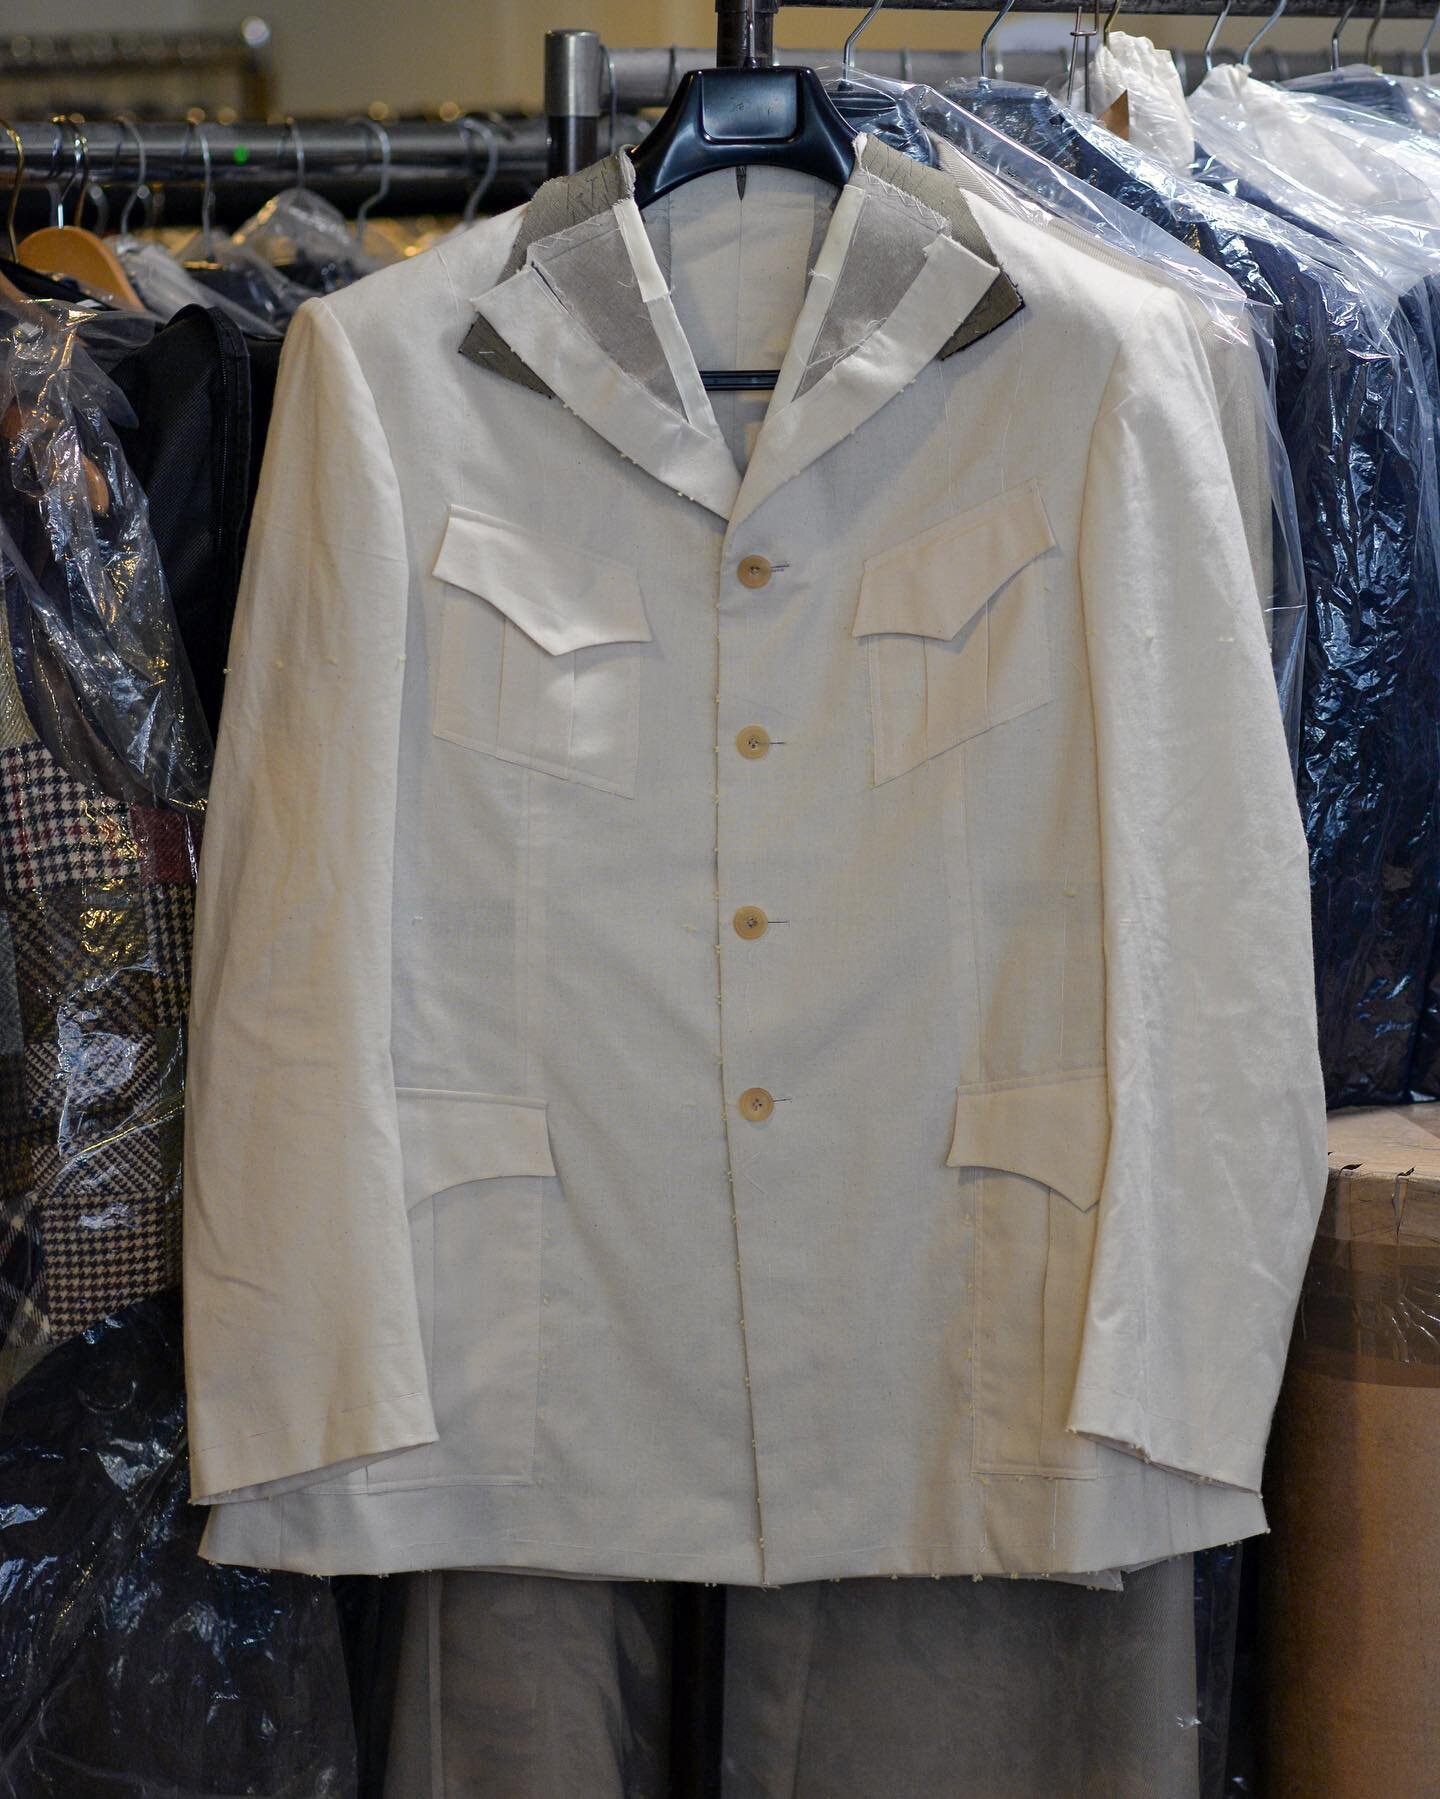 A Safari jacket toile hanging in the workshop. 

We make toiles to work on new models, in order to fine tune construction and design before we start into the cloth, in order to move forward for our clients without compromise.